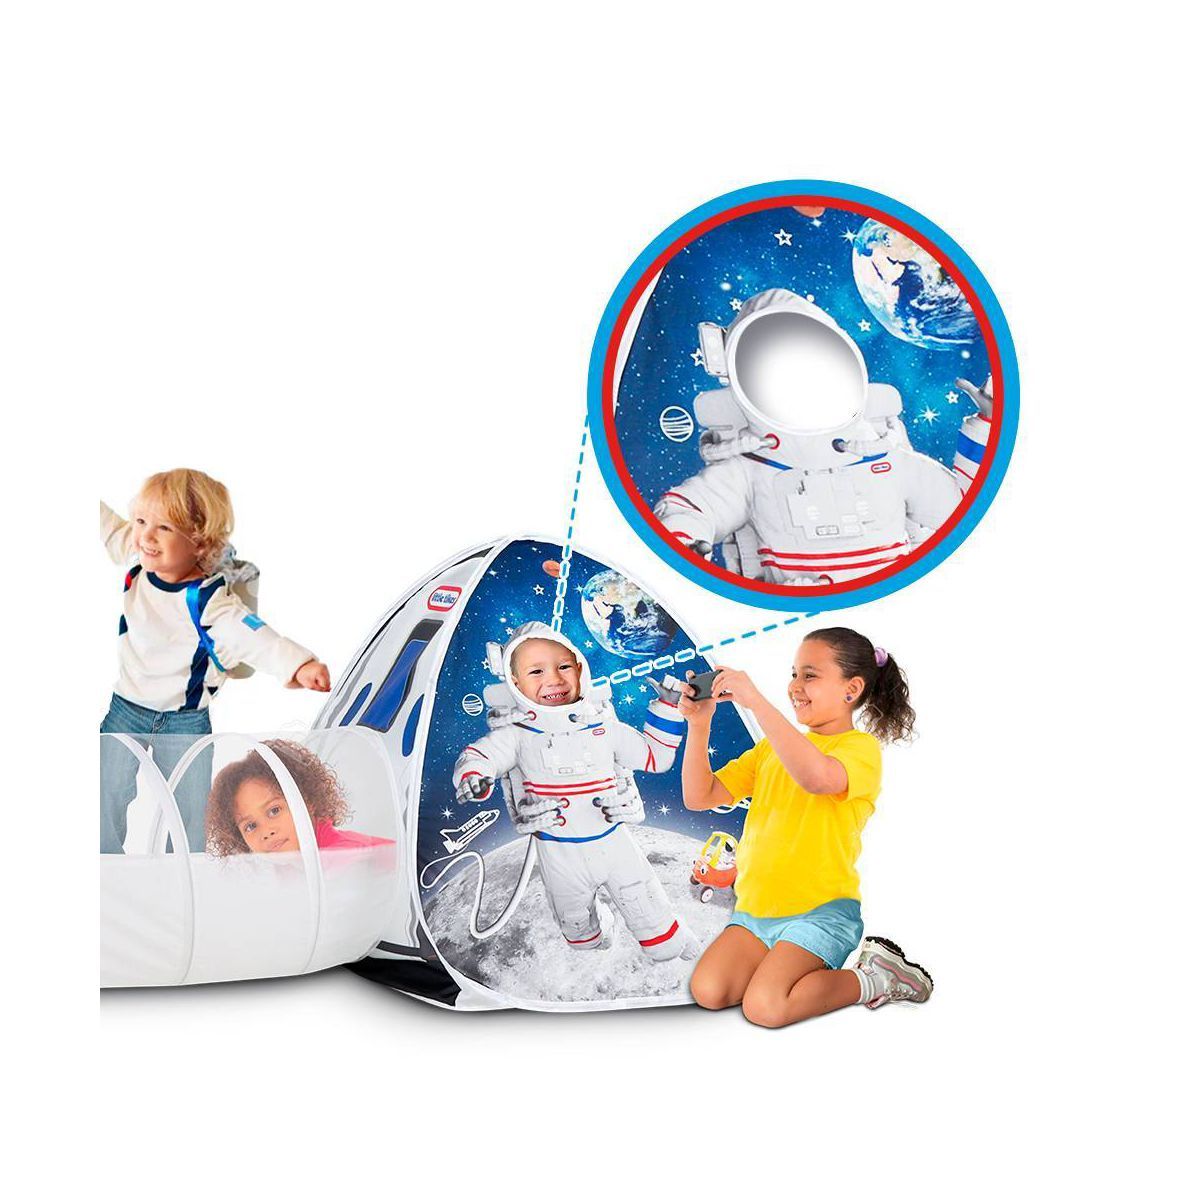 Little Tikes 3 in 1 Space Station Tent with Light | Target